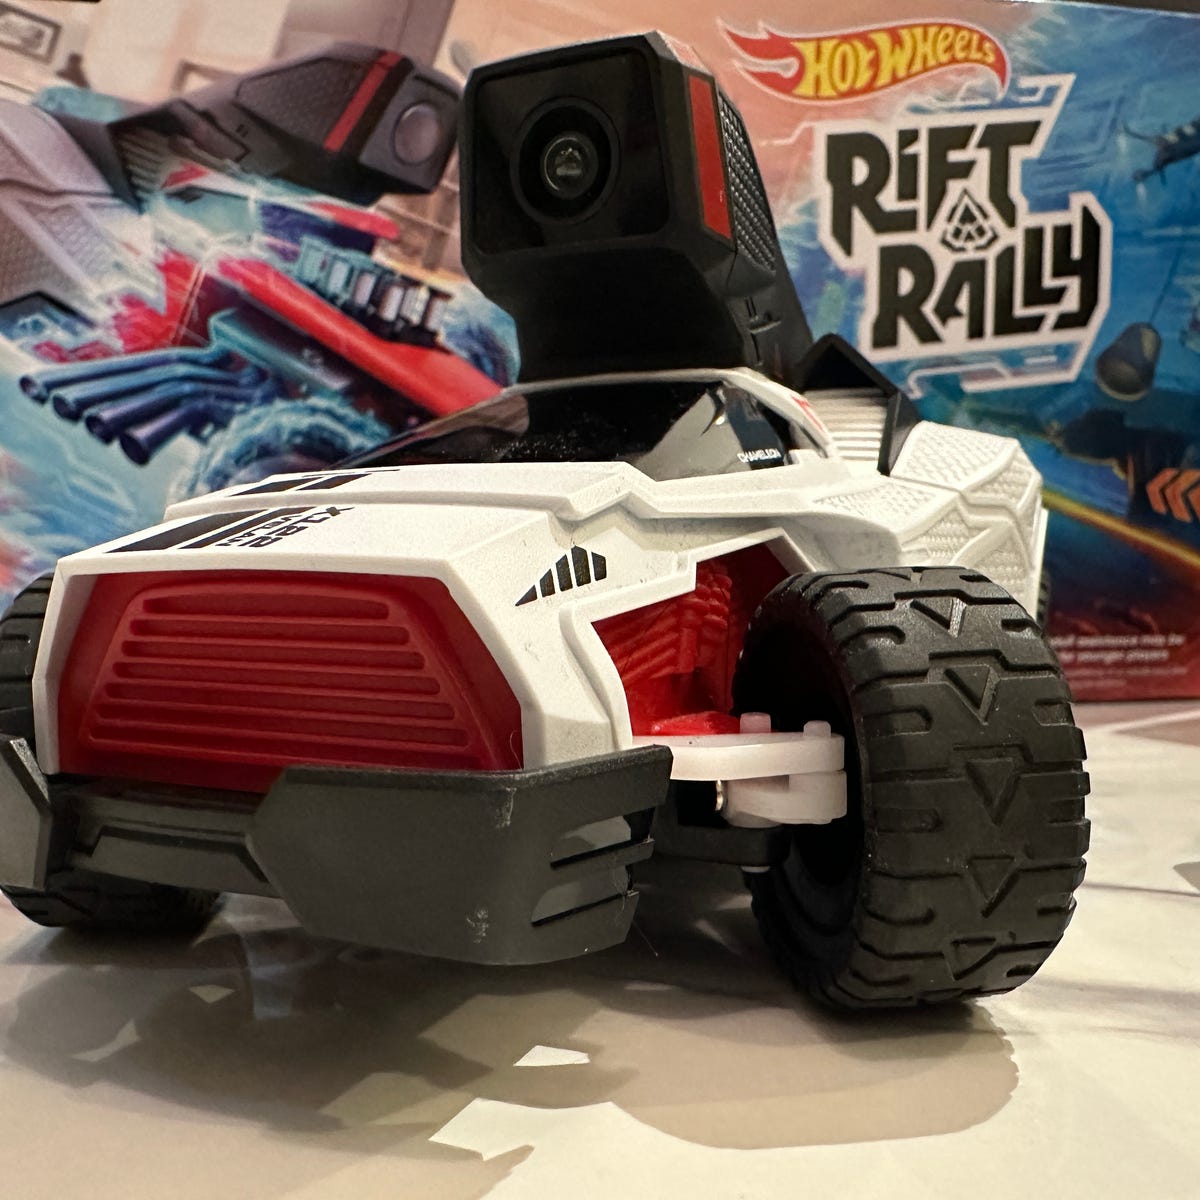 Hot Wheels Rift Rally Turns Your Home Into a Mixed-Reality RC Stunt Track -  CNET